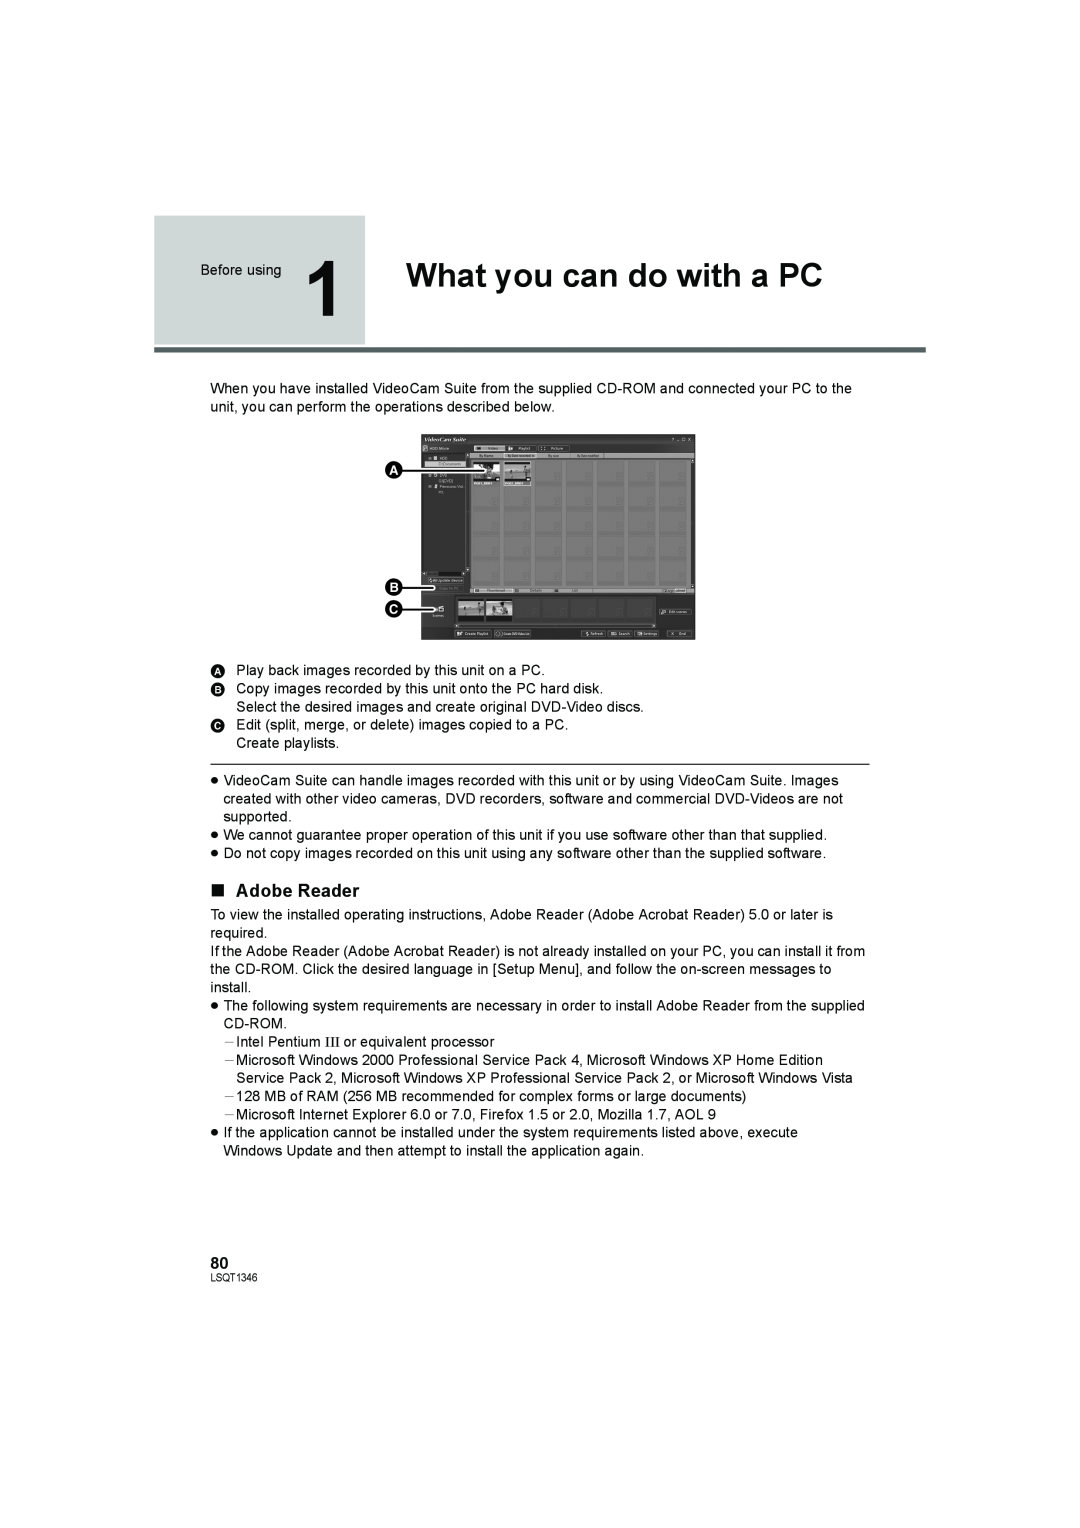 Panasonic SDR-H50 operating instructions What you can do with a PC, A B C, ∫ Adobe Reader 